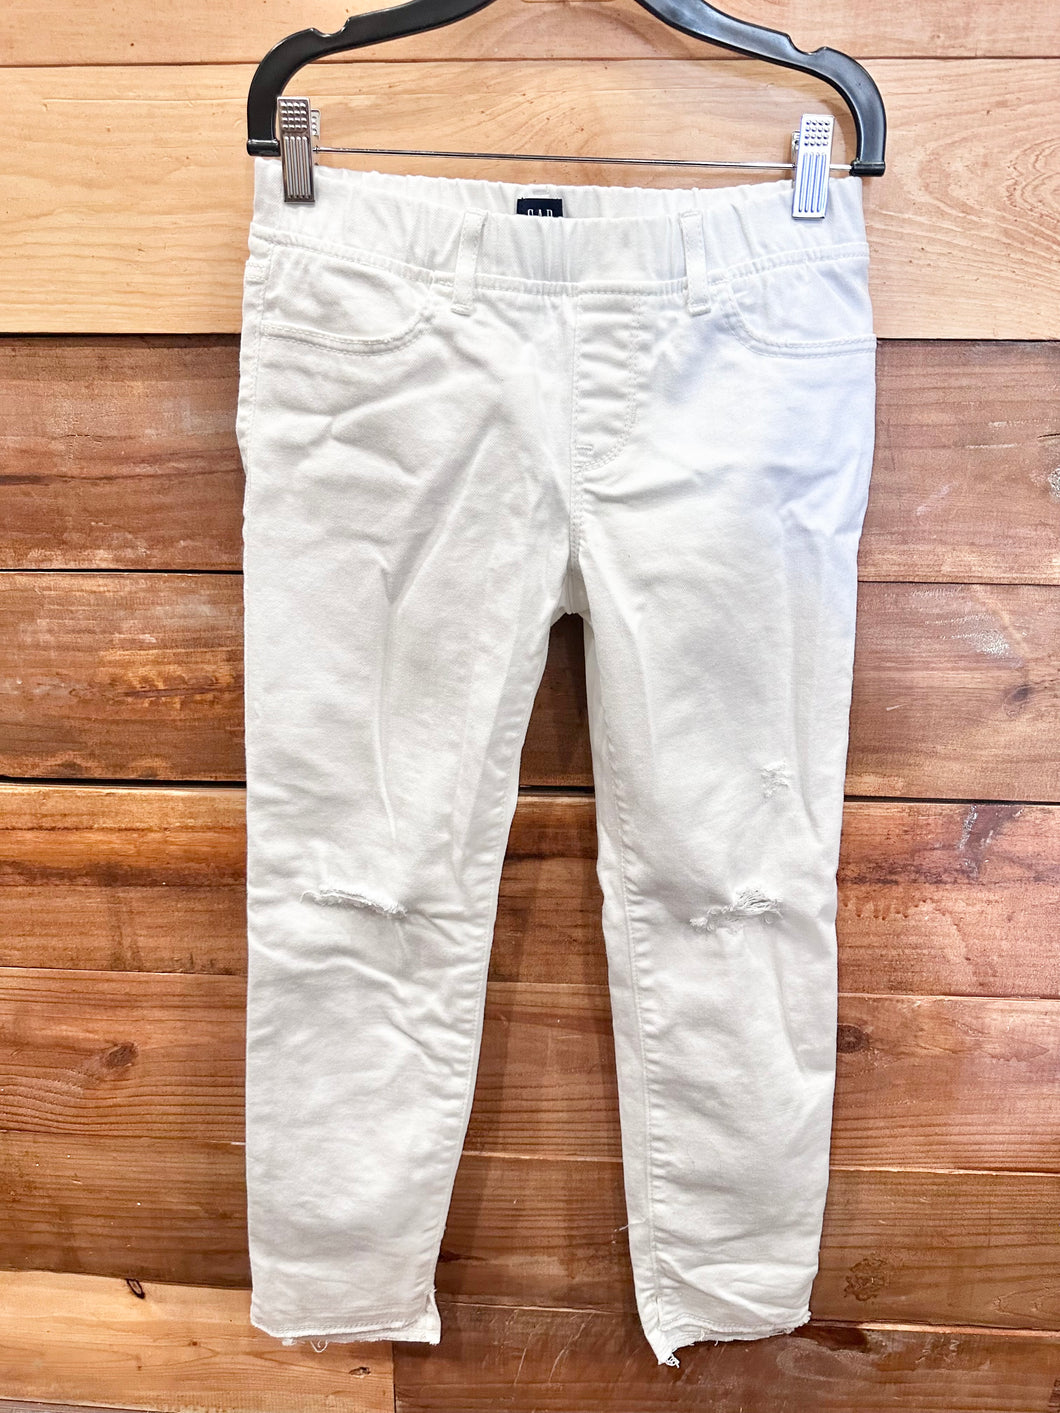 Gap White Distressed Jeans Size 12